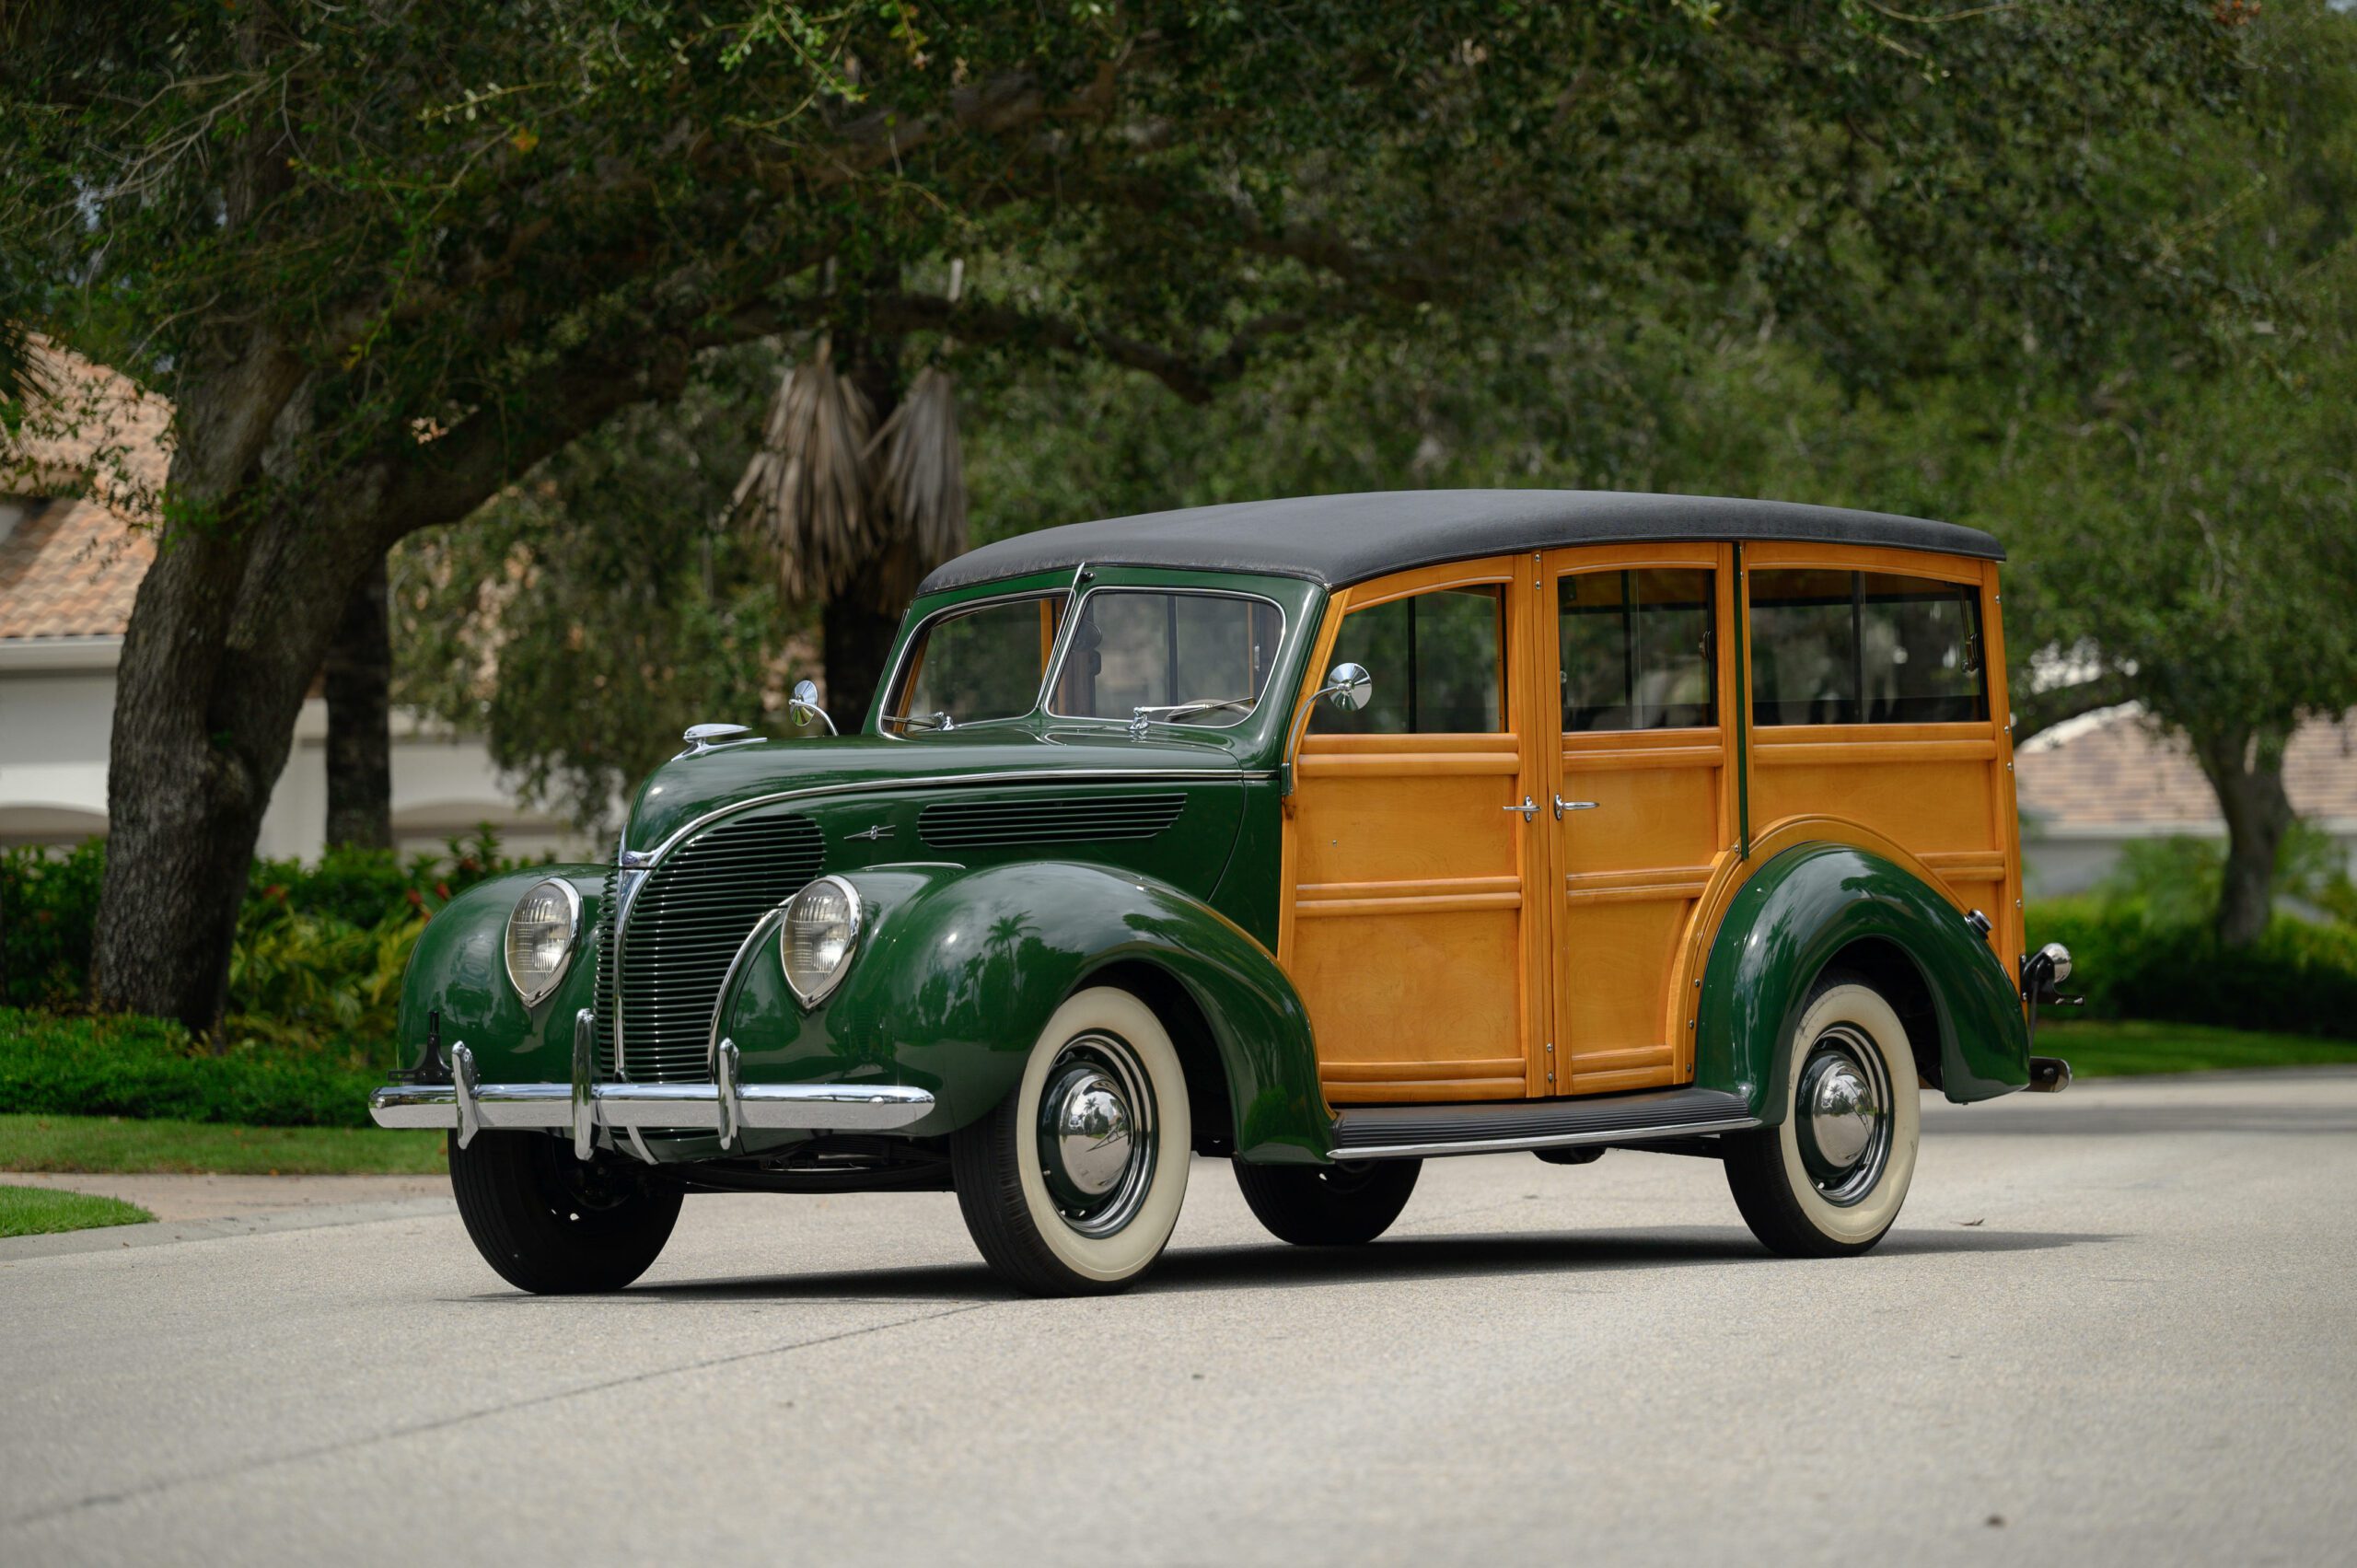 1938 Ford Model 81A Deluxe Station Wagon, ford, Ford Model 81A